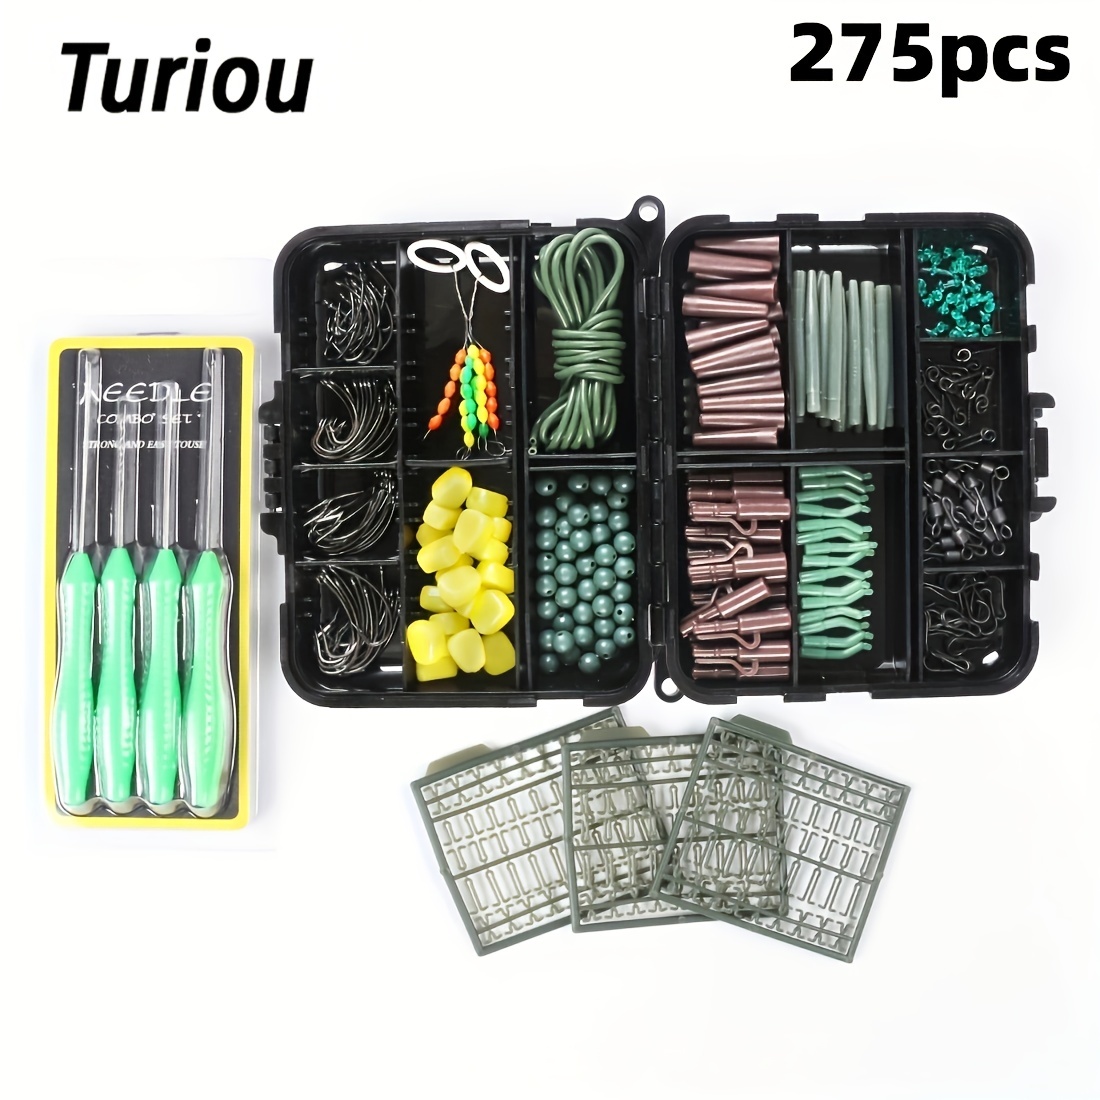 51pcs Crank Hooks With Five Grids Storage Box Set, Wide/Narrow Belly Hook  With Barbs And Lock, Wild Fishing Hook Tackle Set